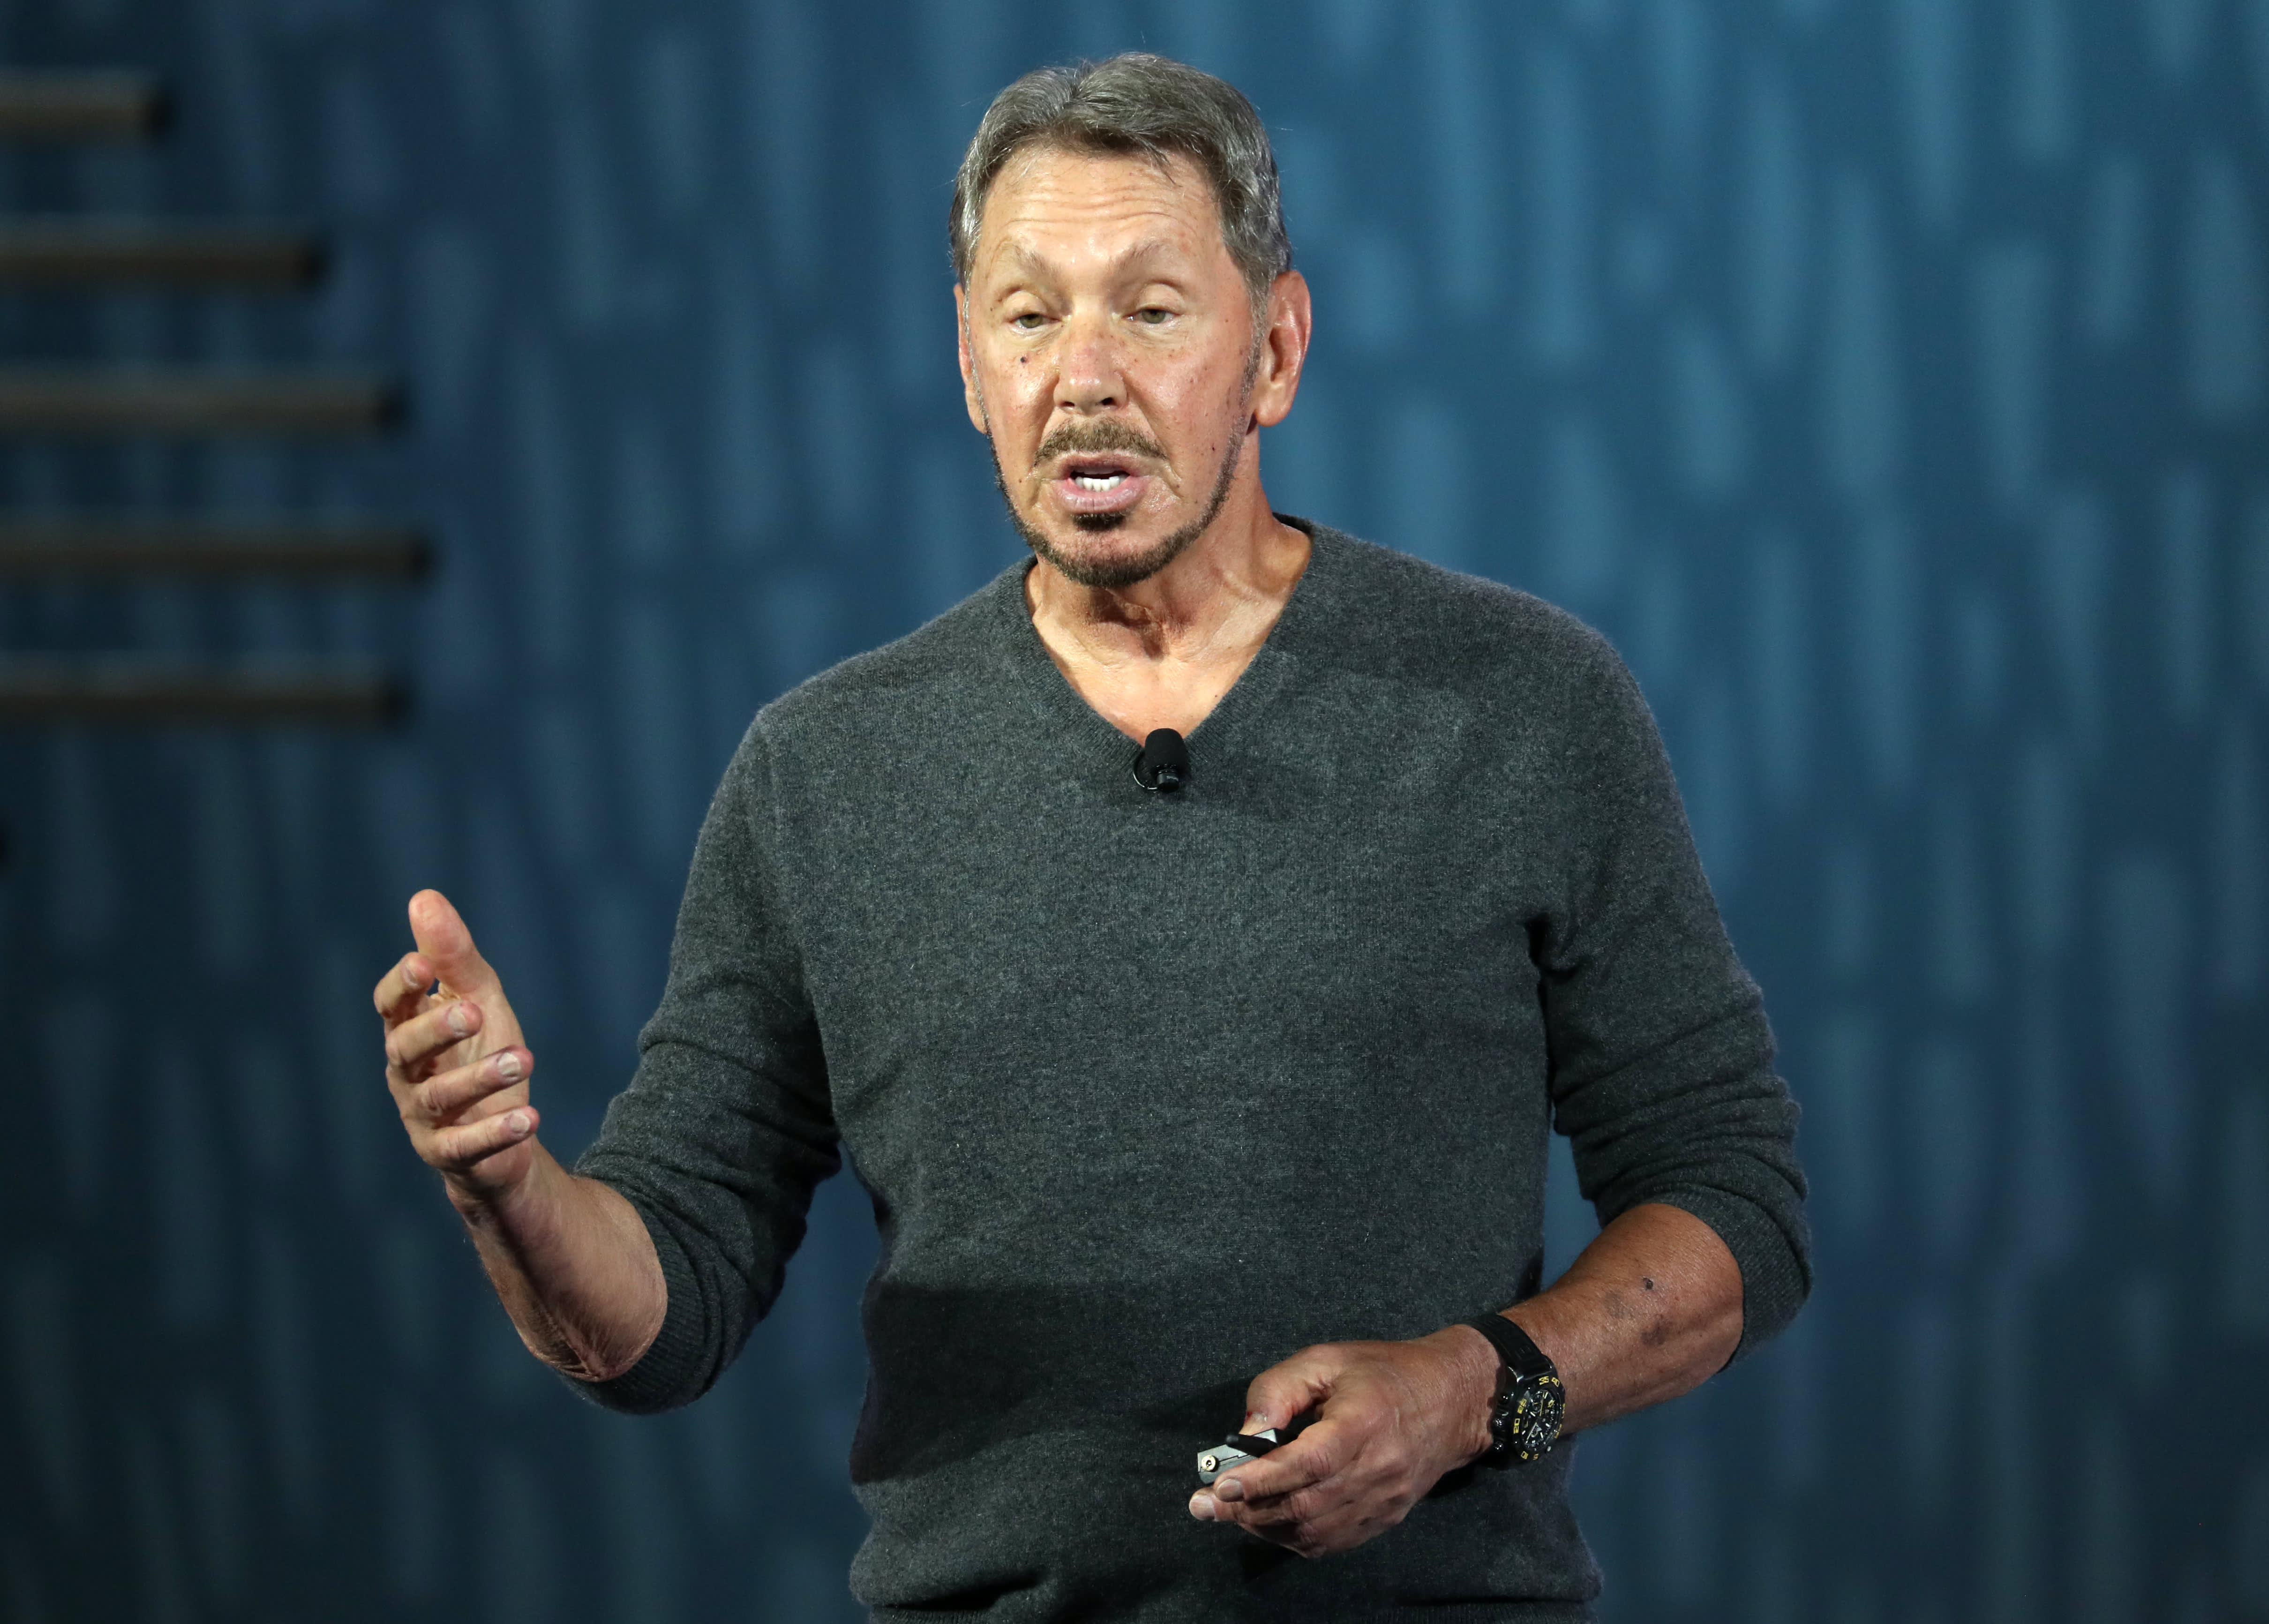 Larry Ellison is now richer than the Google co-founders Page and Brin